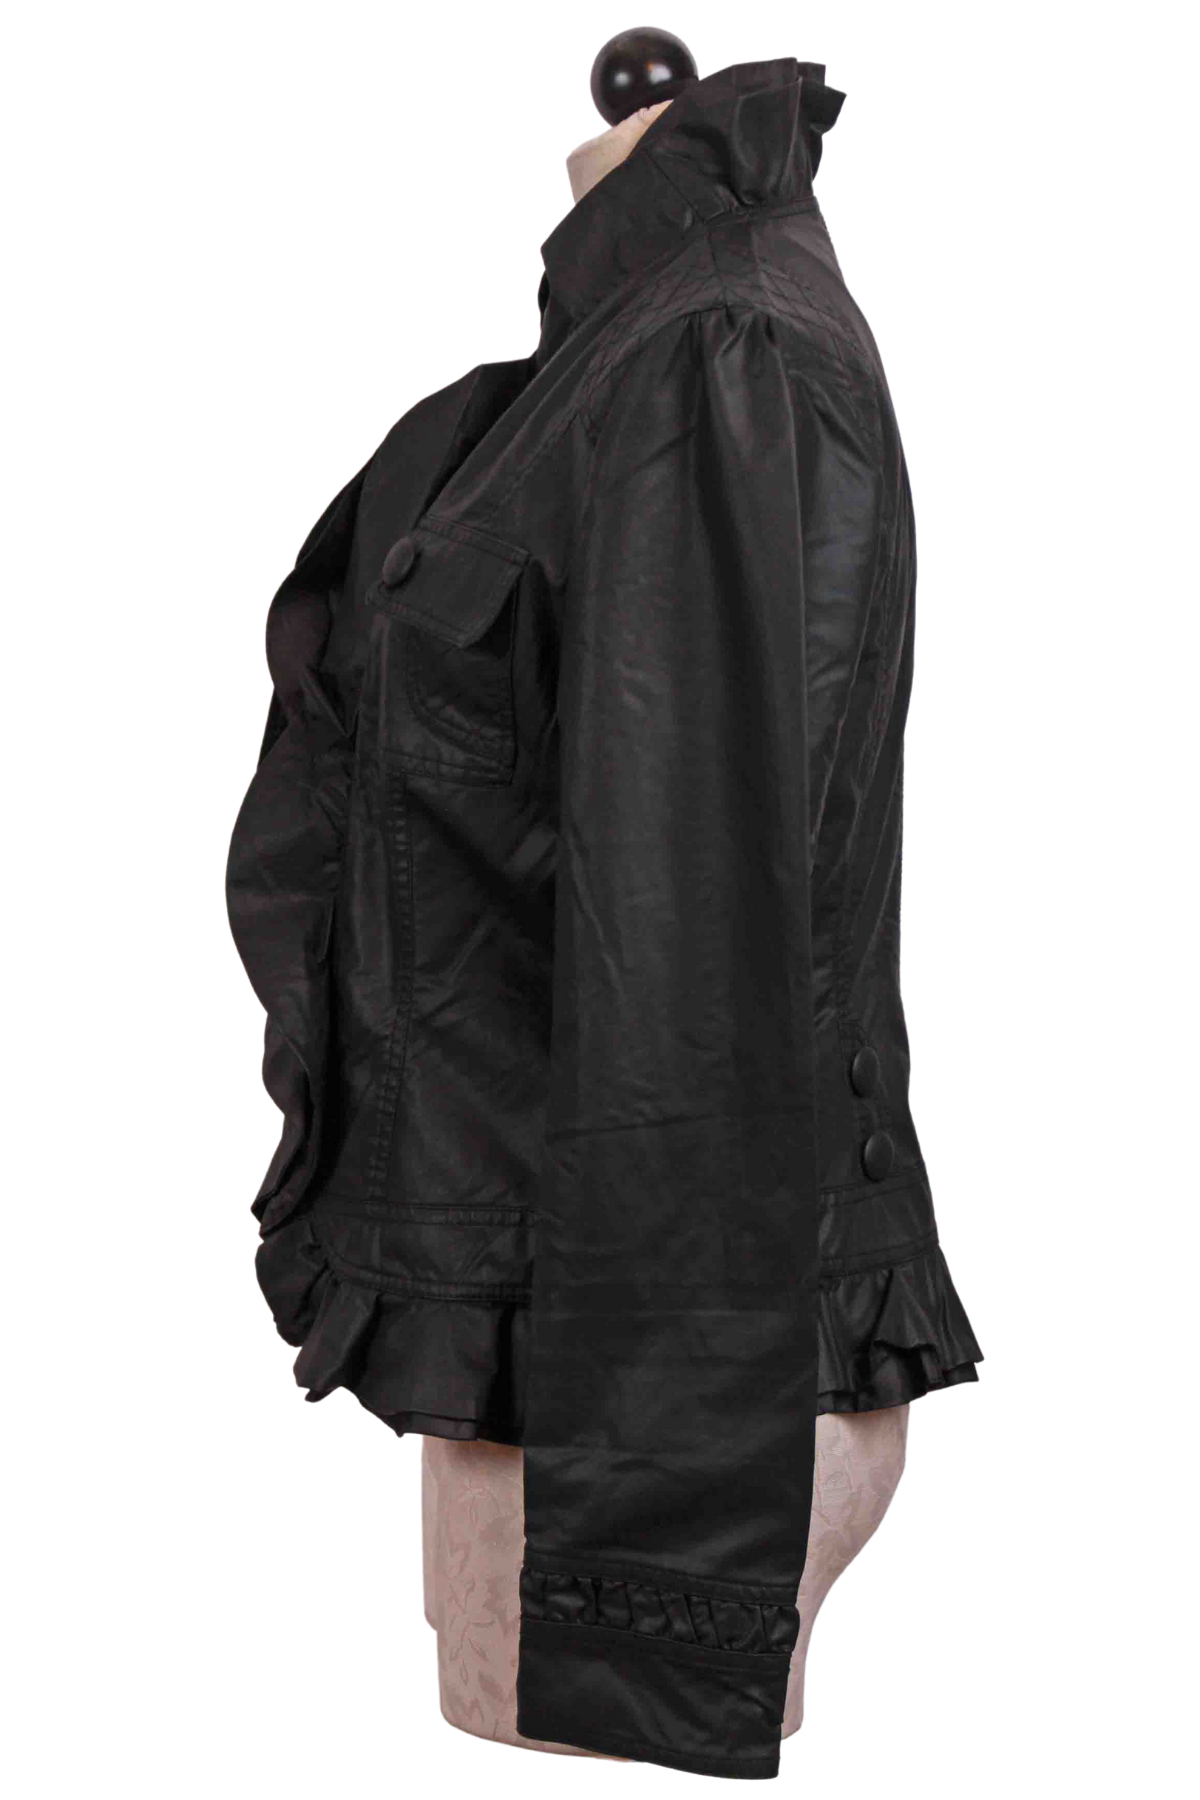 Side view of Black 2 Pocket Vegan Ruffle Jacket by Apricot